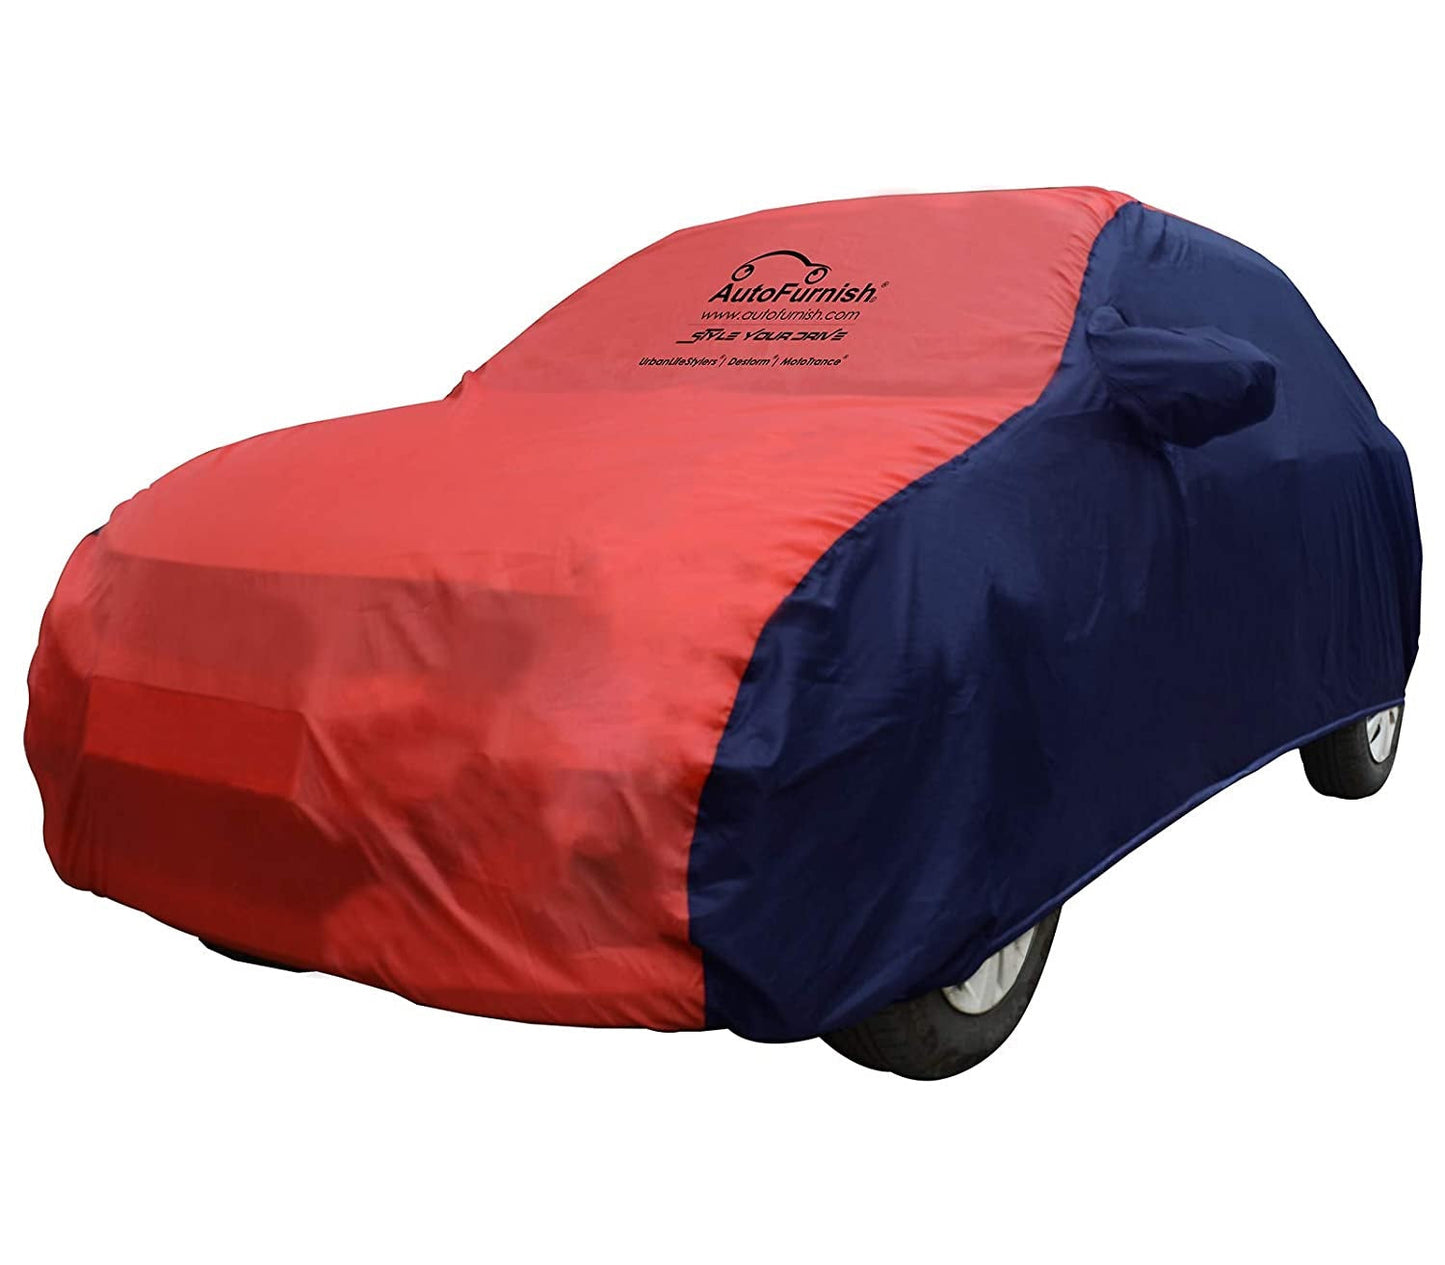 BMW X7 xDrive (2019) Car Body Cover, Triple Stitched, Heat & Water Resistant with Side Mirror Pockets (SPORTY Series)